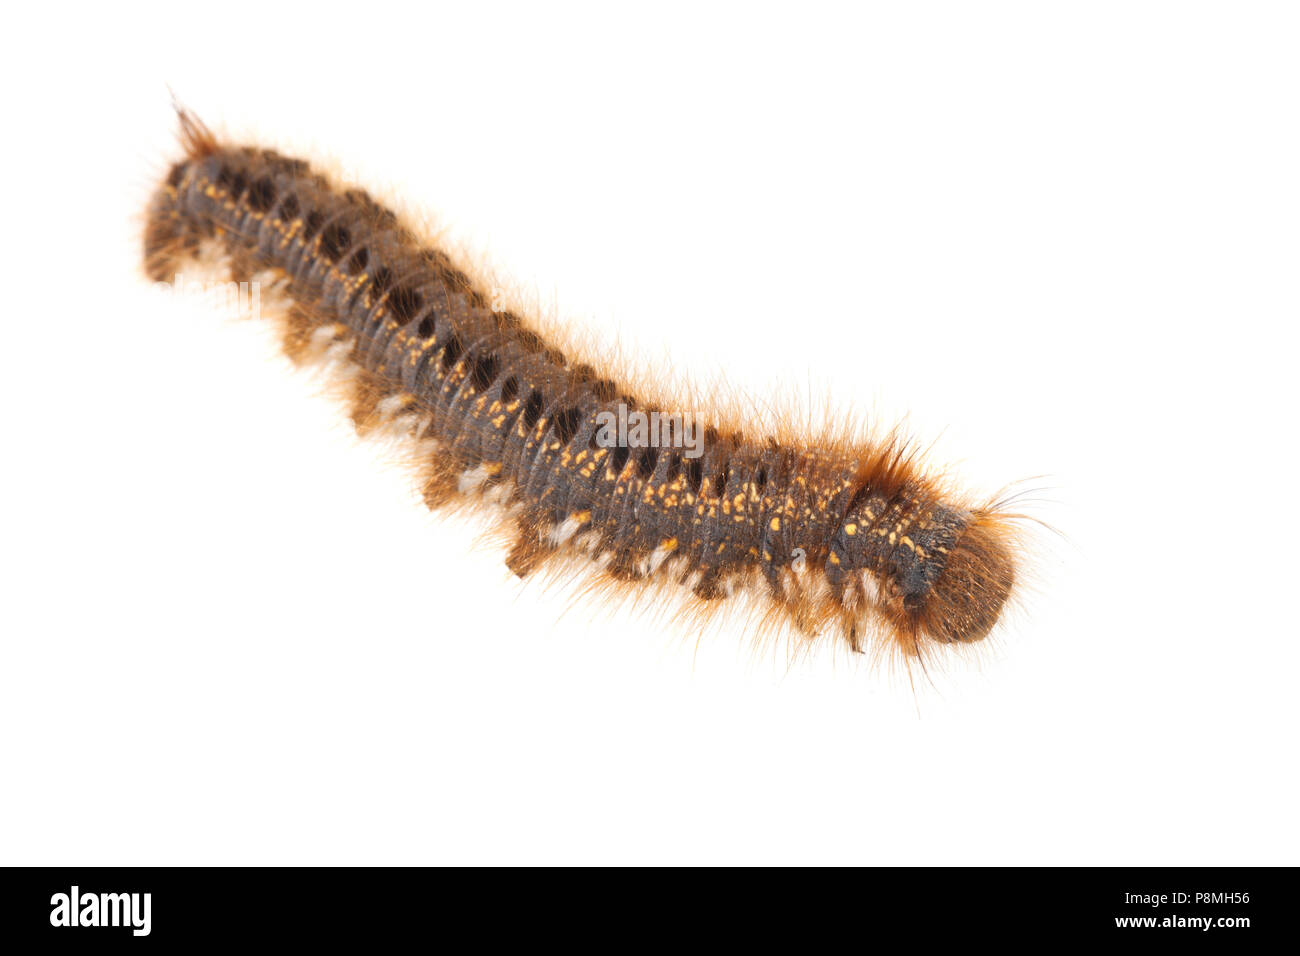 caterpillar of a drinker isolated against a white background Stock Photo